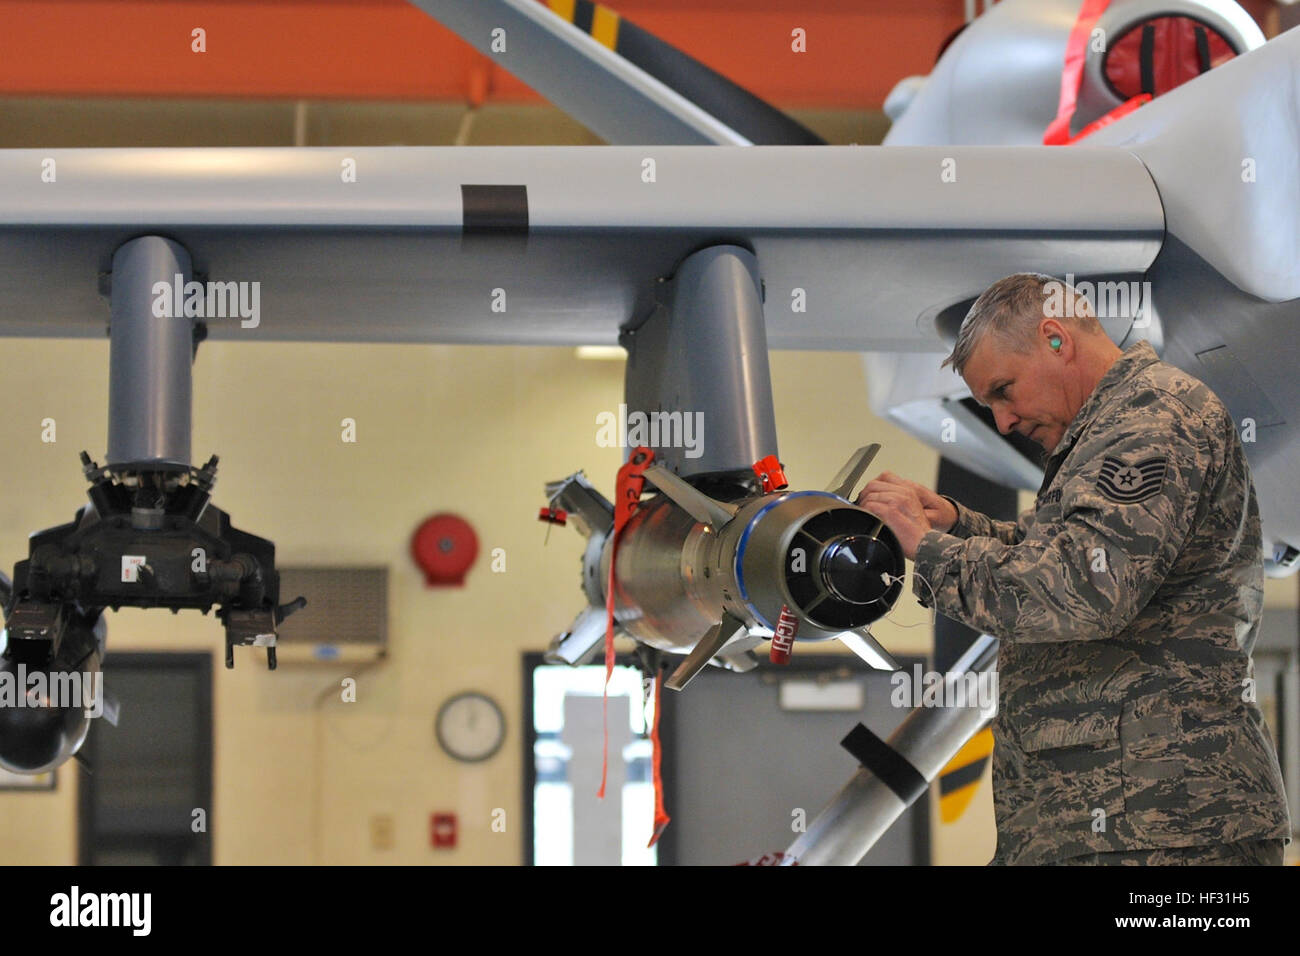 Members of the 174th Attack Wing Munitions Flight train on loading procedures on March 7, 2015, at Hancock Field Air National Guard Base. The munition load crew must be certified quarterly on transporting, loading and wiring munitions onto the MQ-9 Reaper that precisely hit specific targets. The MQ-9 Reaper is an armed, multi-mission, medium-altitude, long-endurance remotely piloted aircraft that is employed primarily for intelligence, surveillance and reconnaissance (ISR). Military intelligence is a military discipline that collects information and analysis to provide guidance and direction t Stock Photo